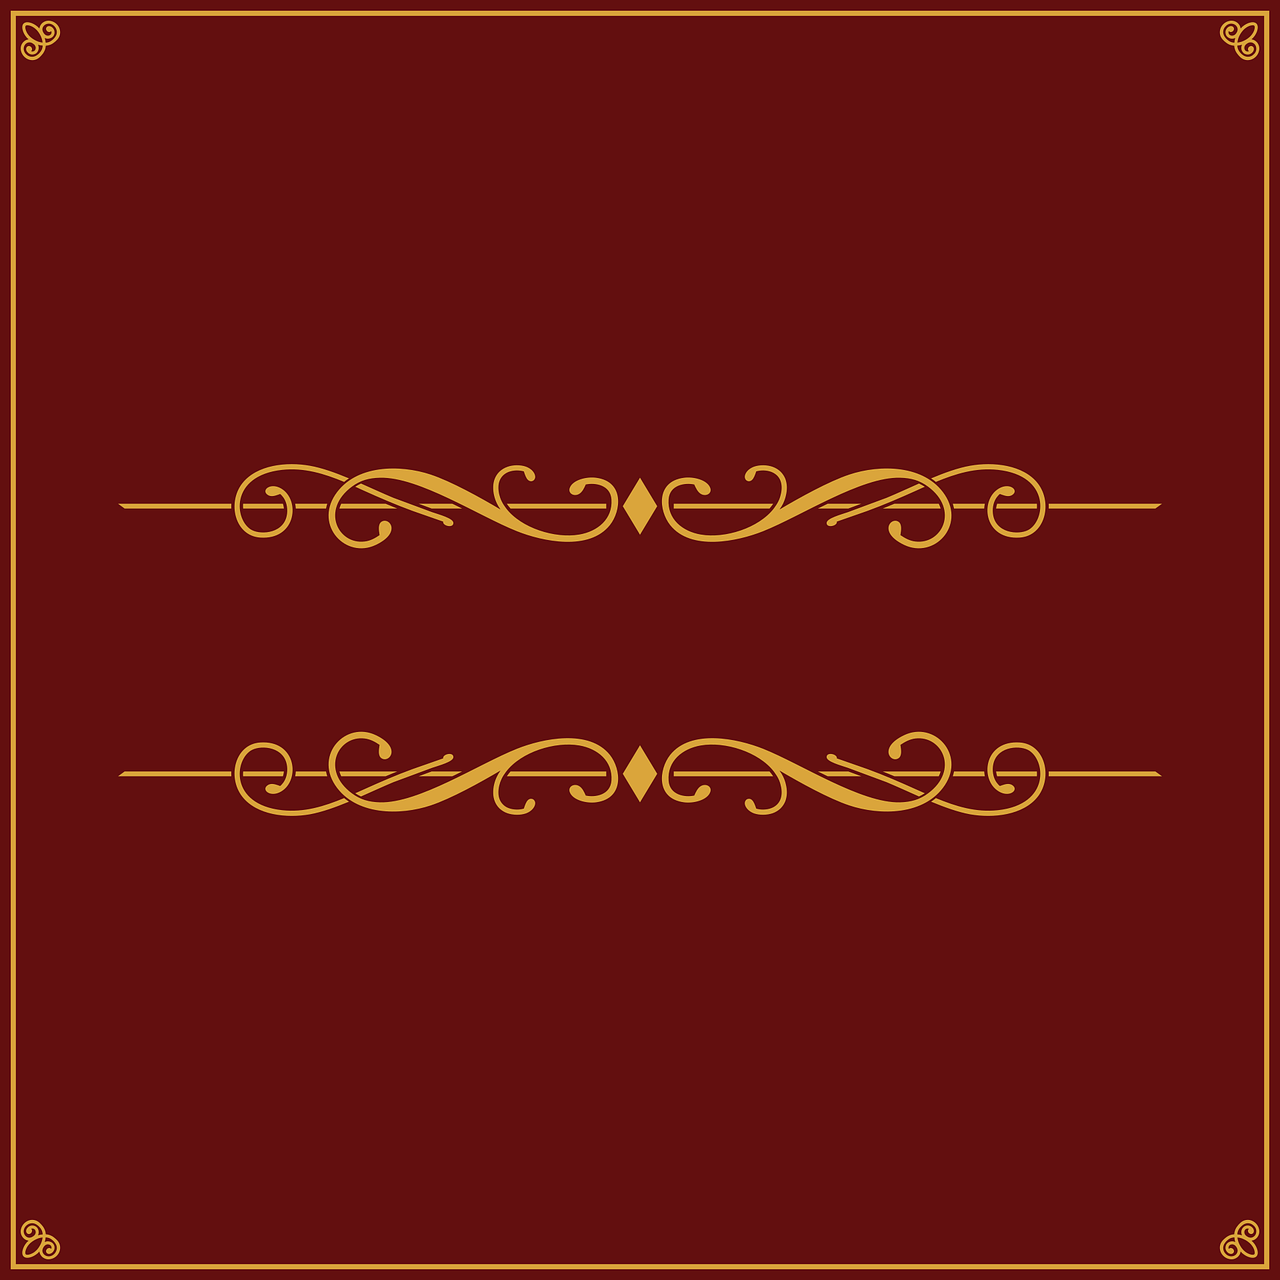 a decorative gold frame on a red background, an album cover, line vector art, ornate borders, fine simple delicate structure, book cover illustration